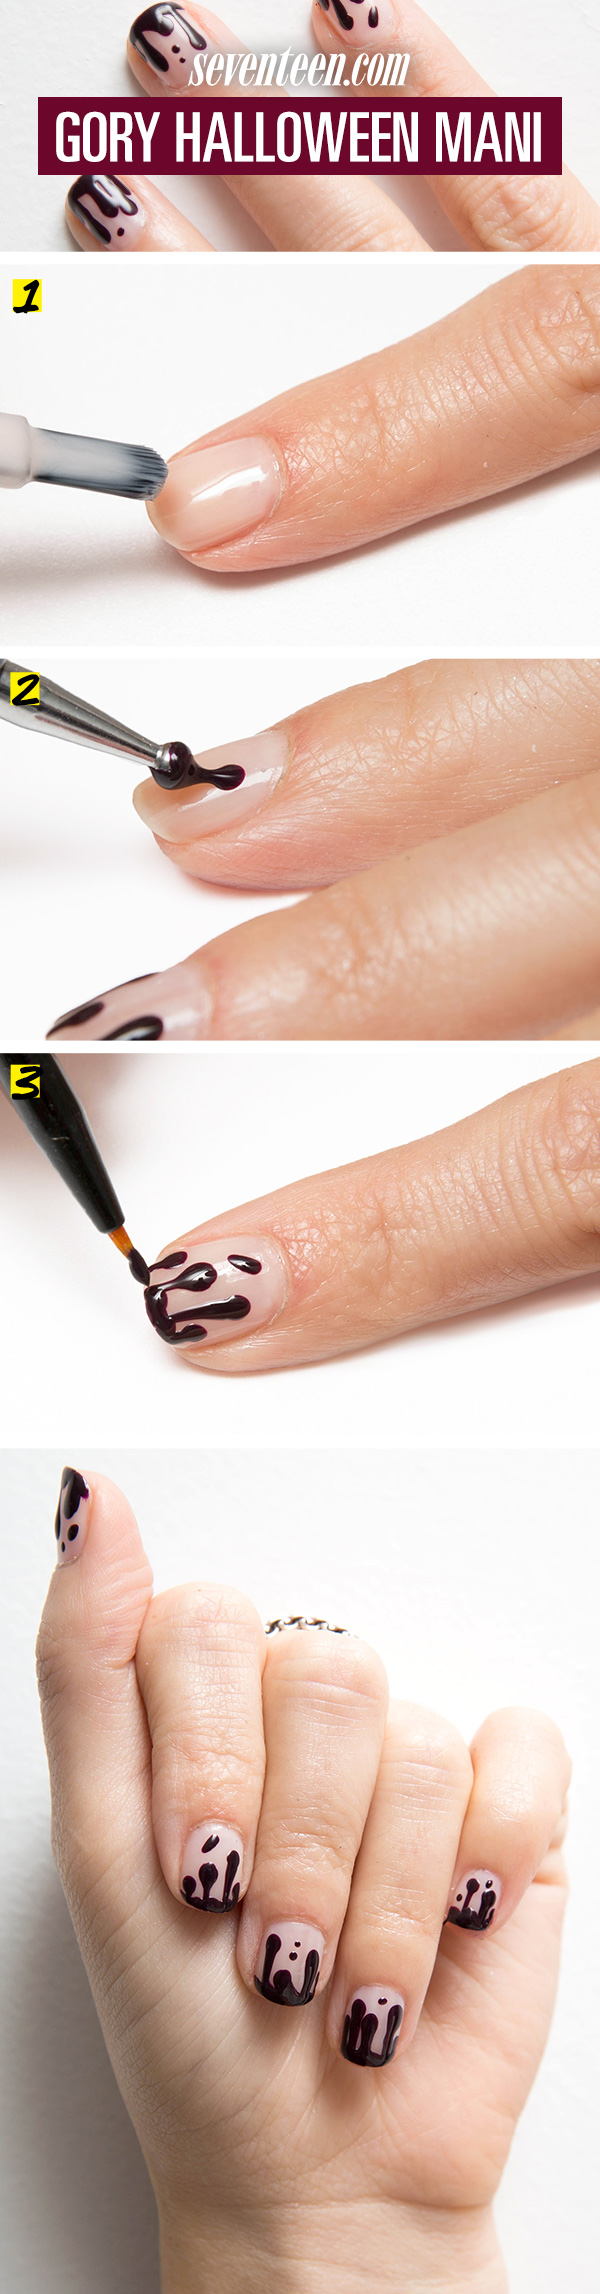 The Best Step by Step Halloween Nail Tutorials You Should Not Miss